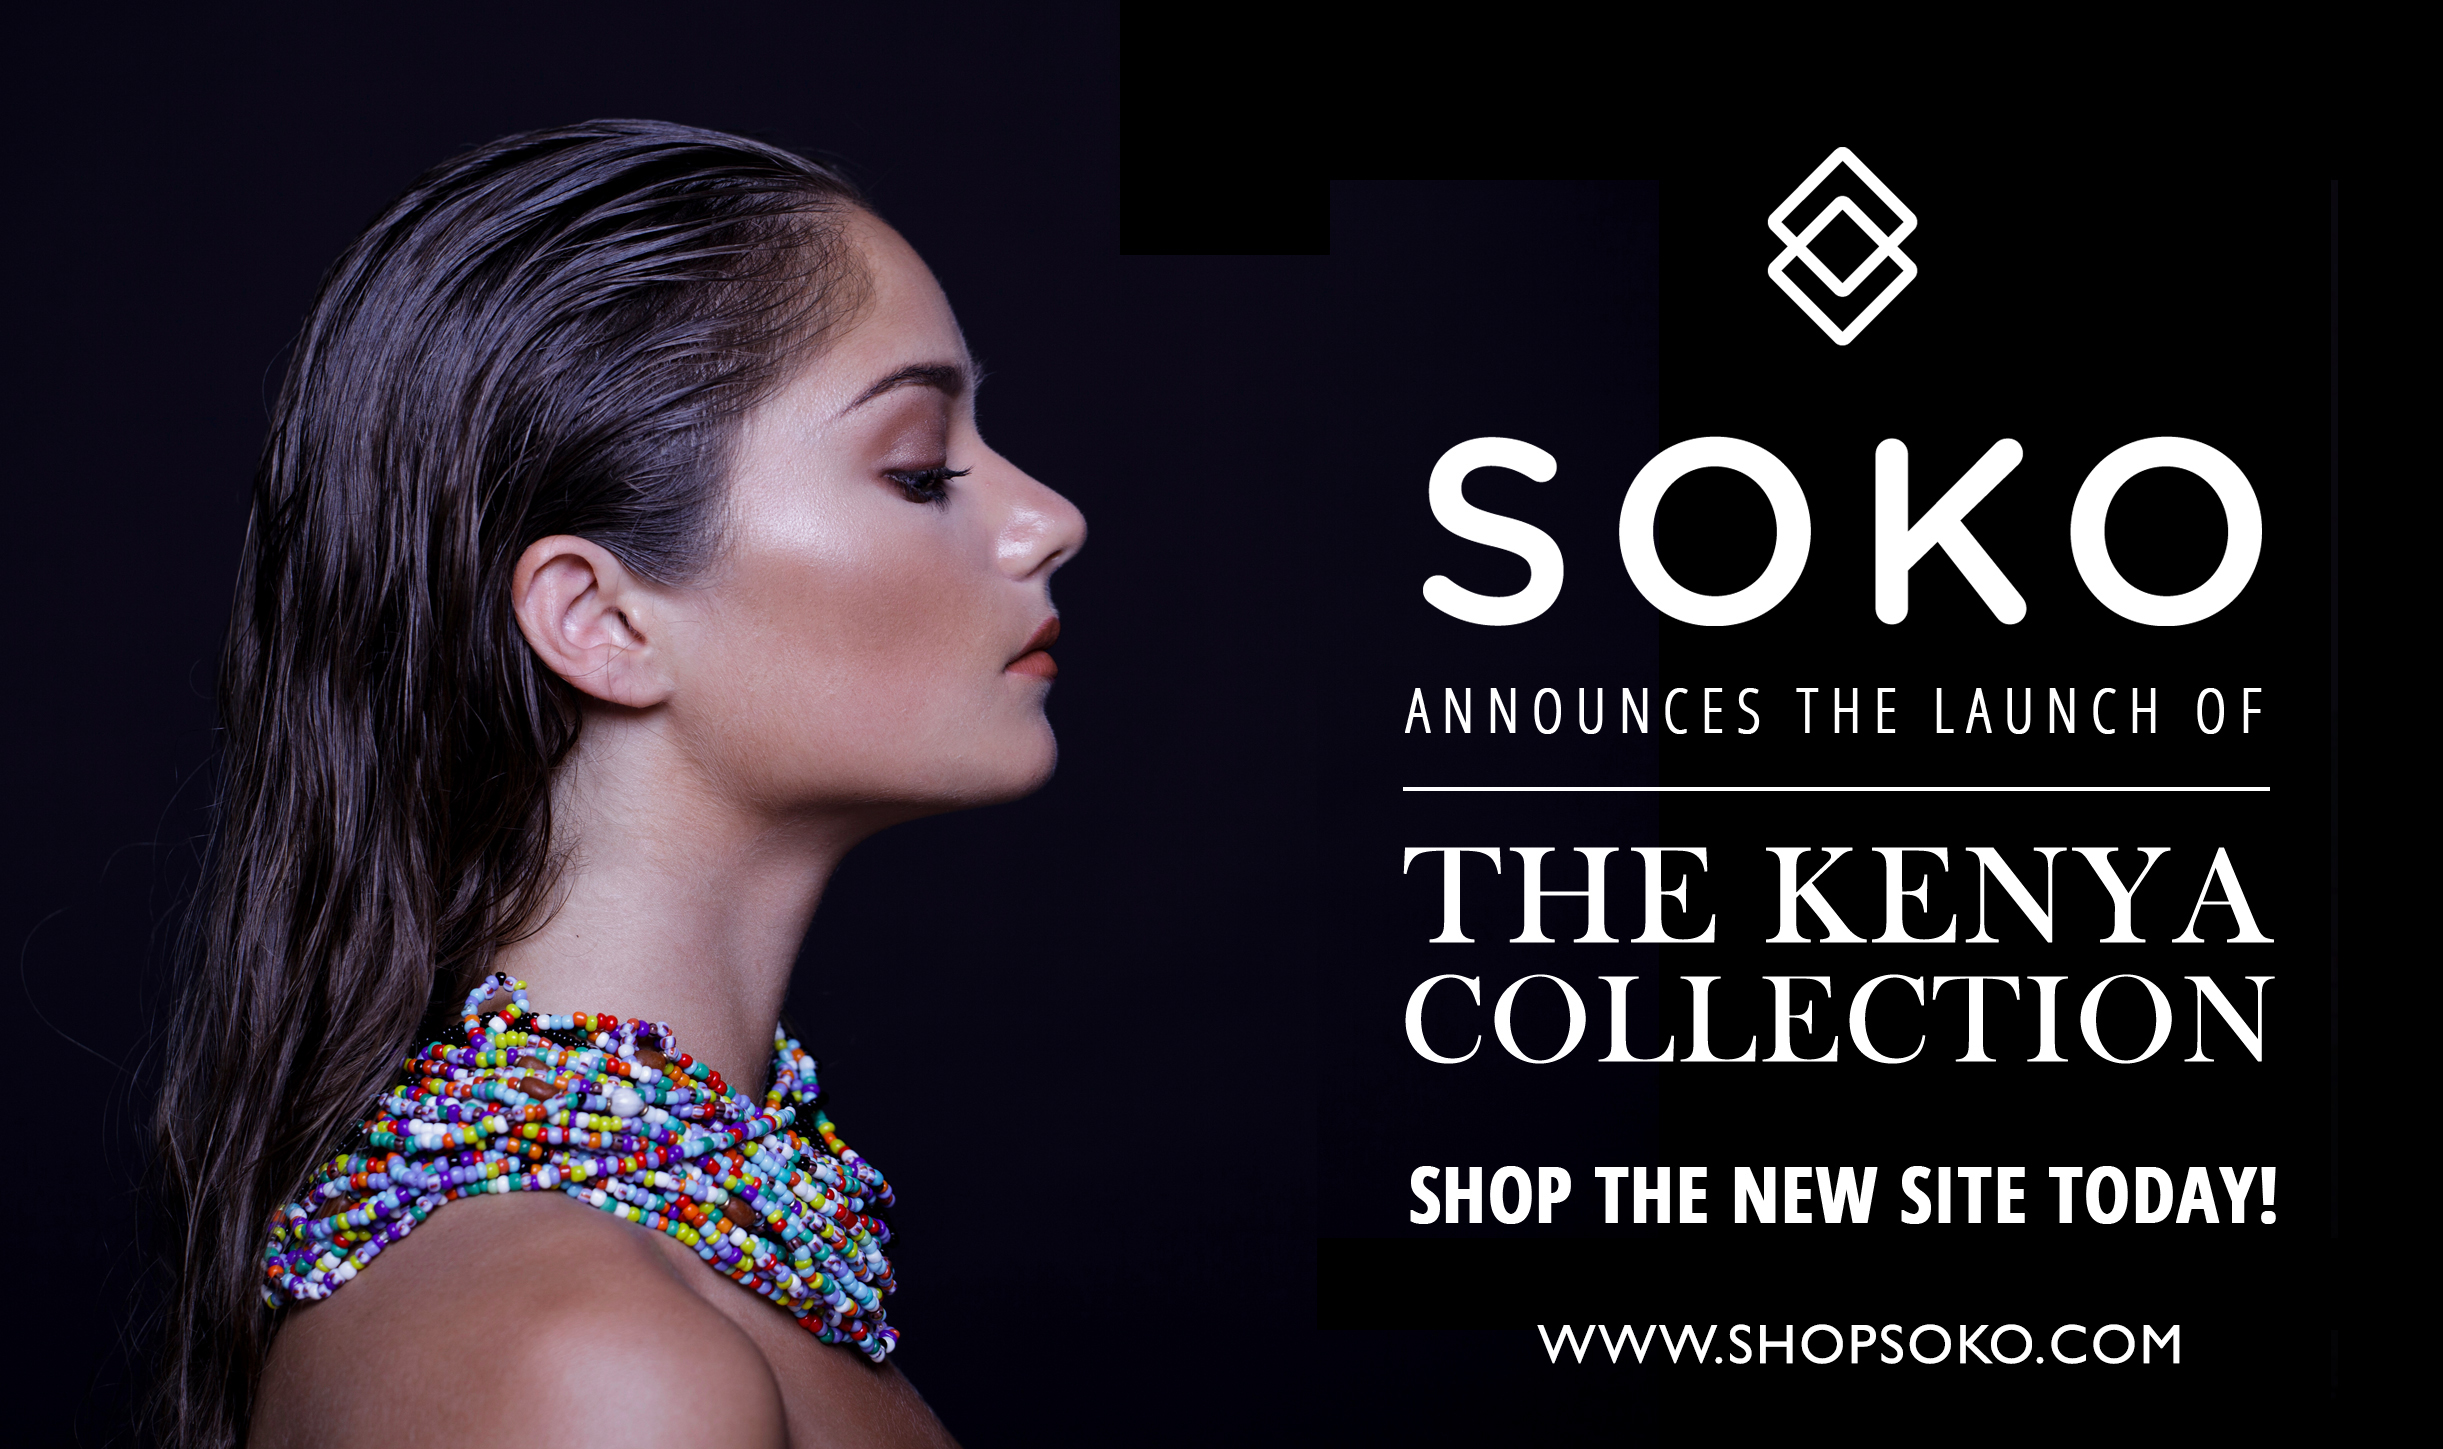 Soko launches the Kenya Collection